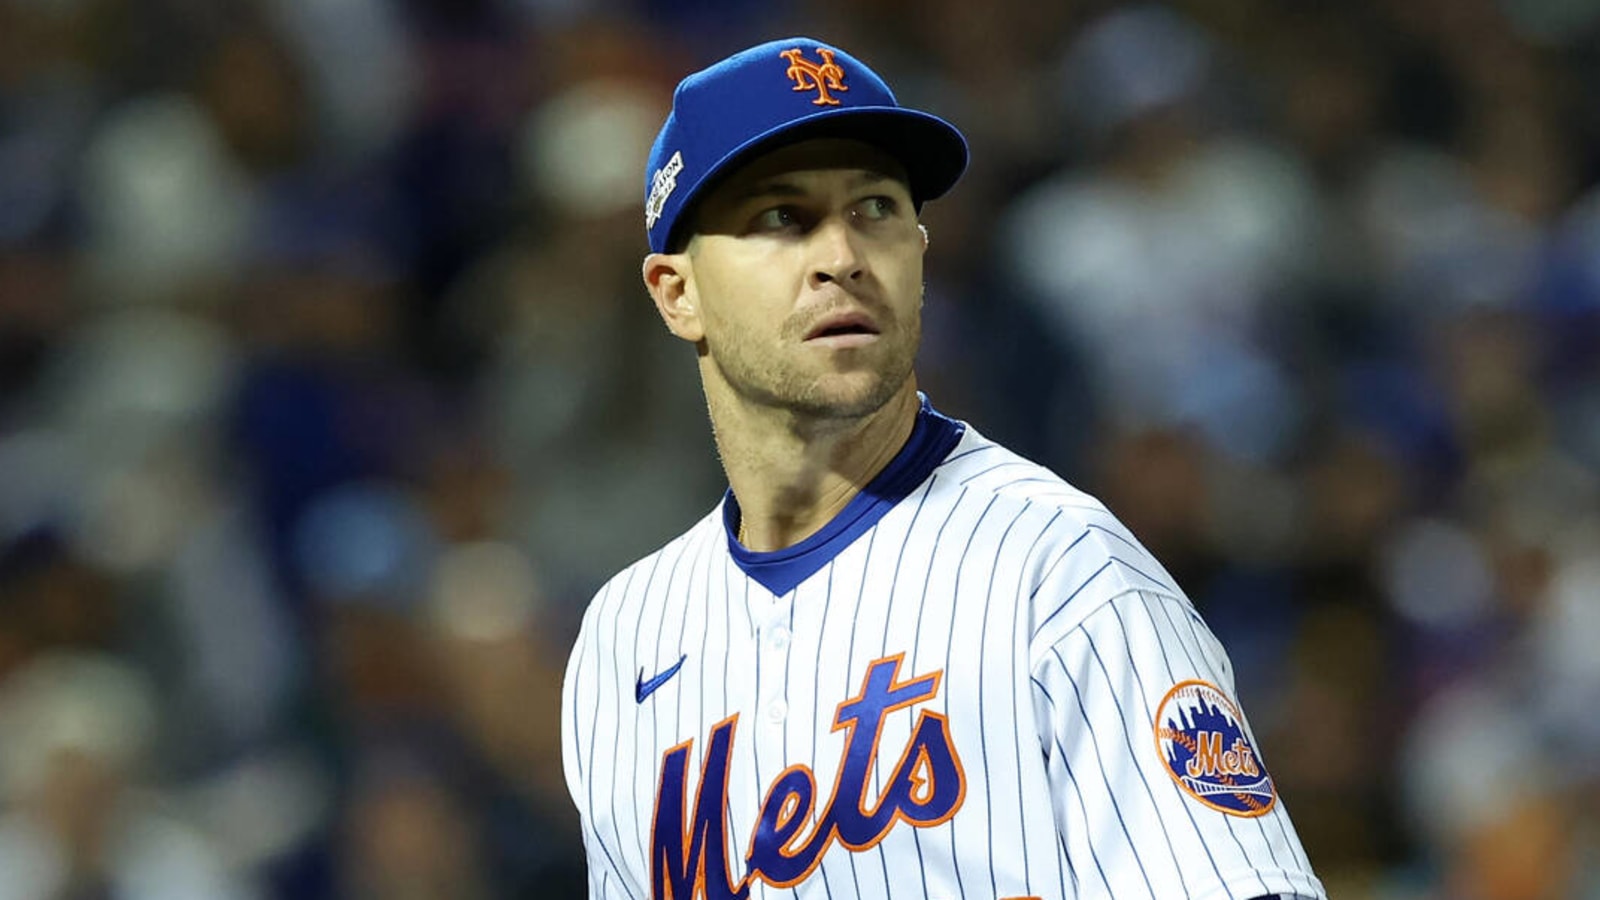 Mets tolerate Jacob deGrom's pushing limits. His body may not